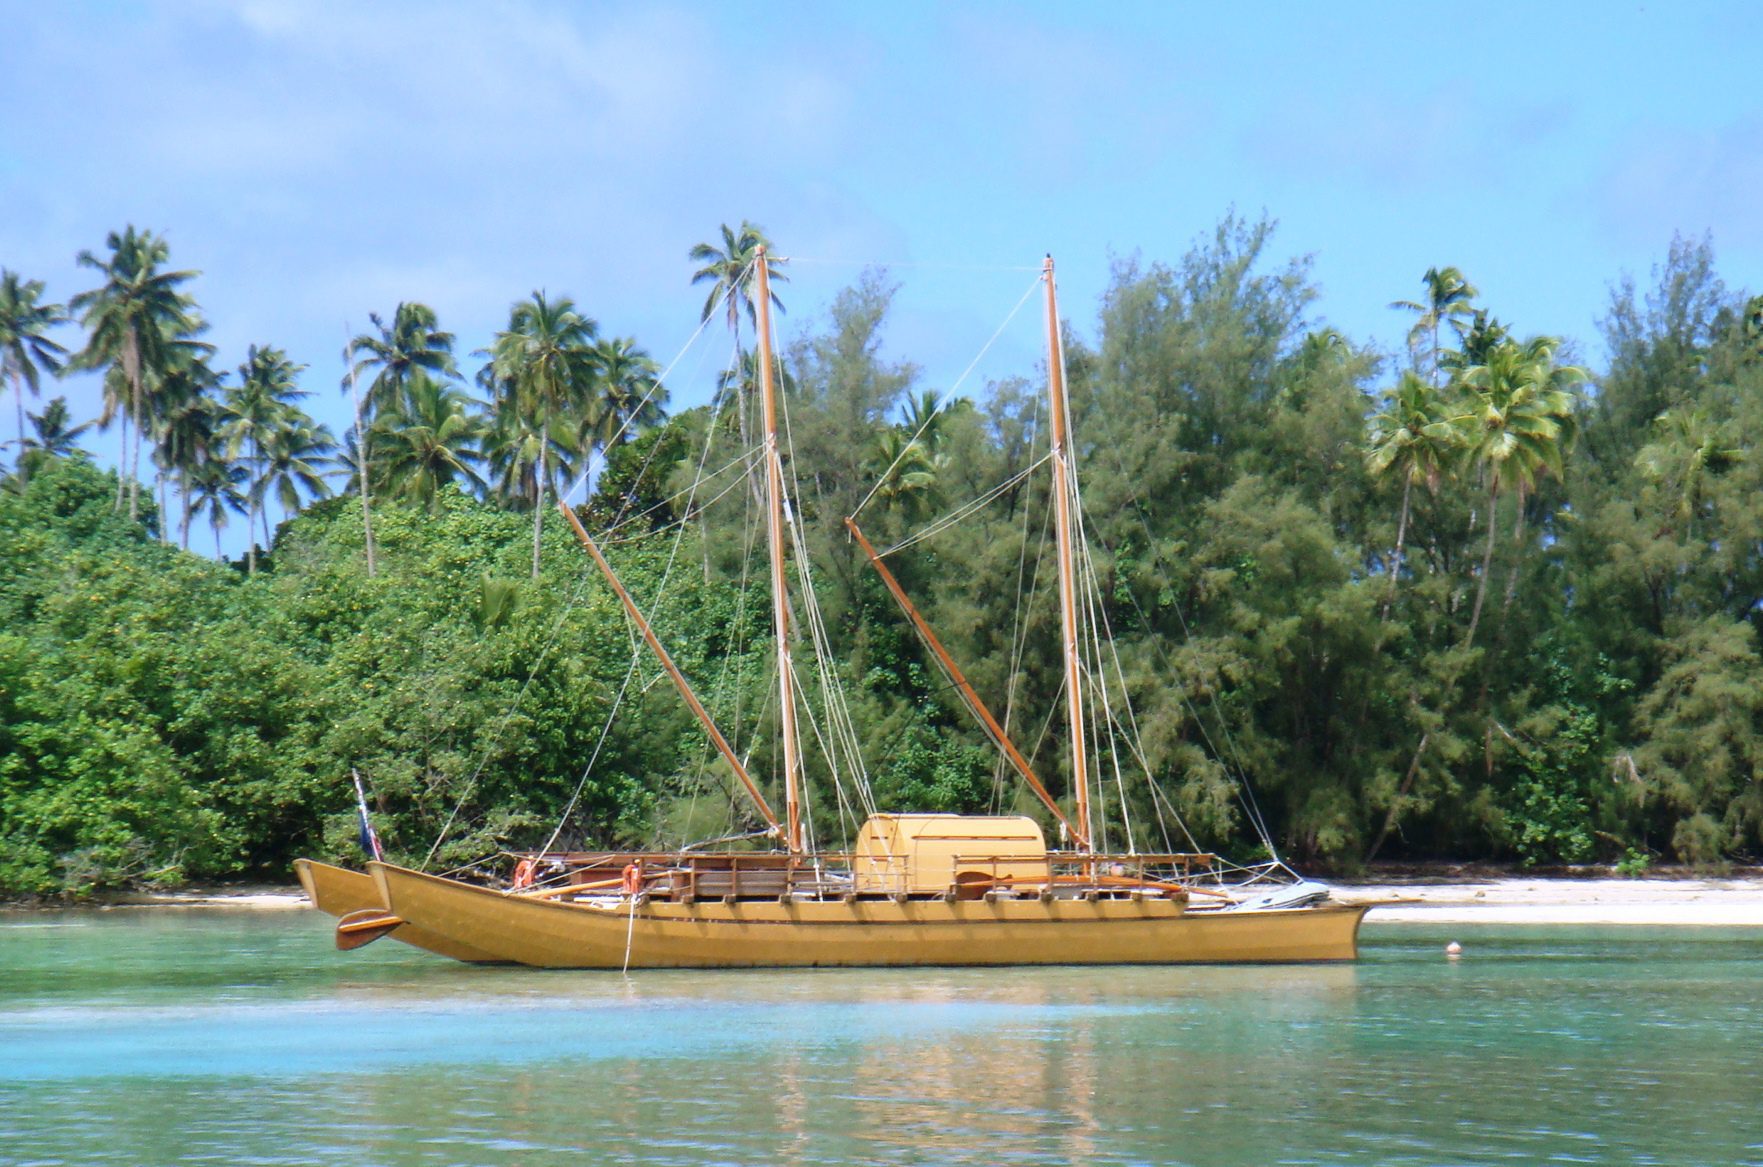 How Did Ancient Seafarers Settle The Far-Flung Islands Of Polynesia?